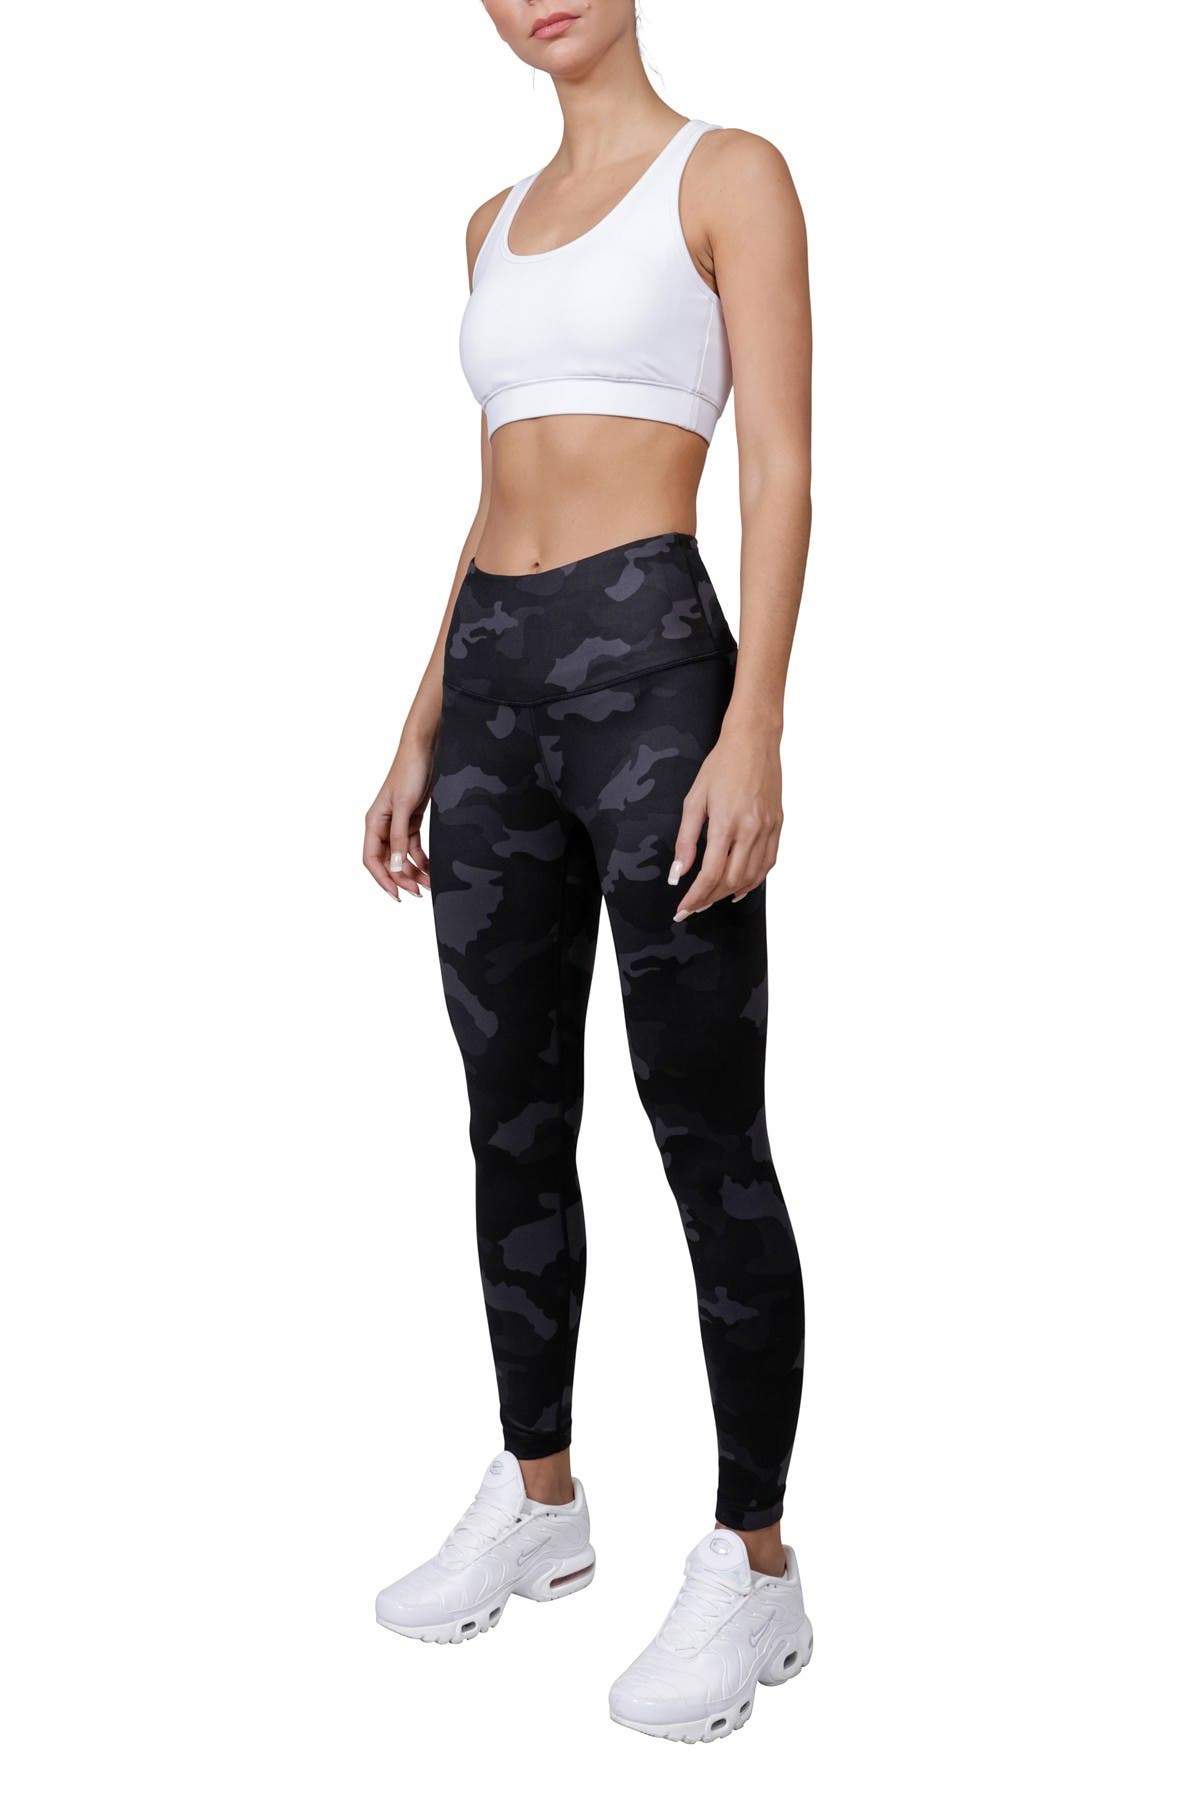 90 Degree By Reflex | Lux Camo High Waisted Ankle Leggings | Nordstrom Rack